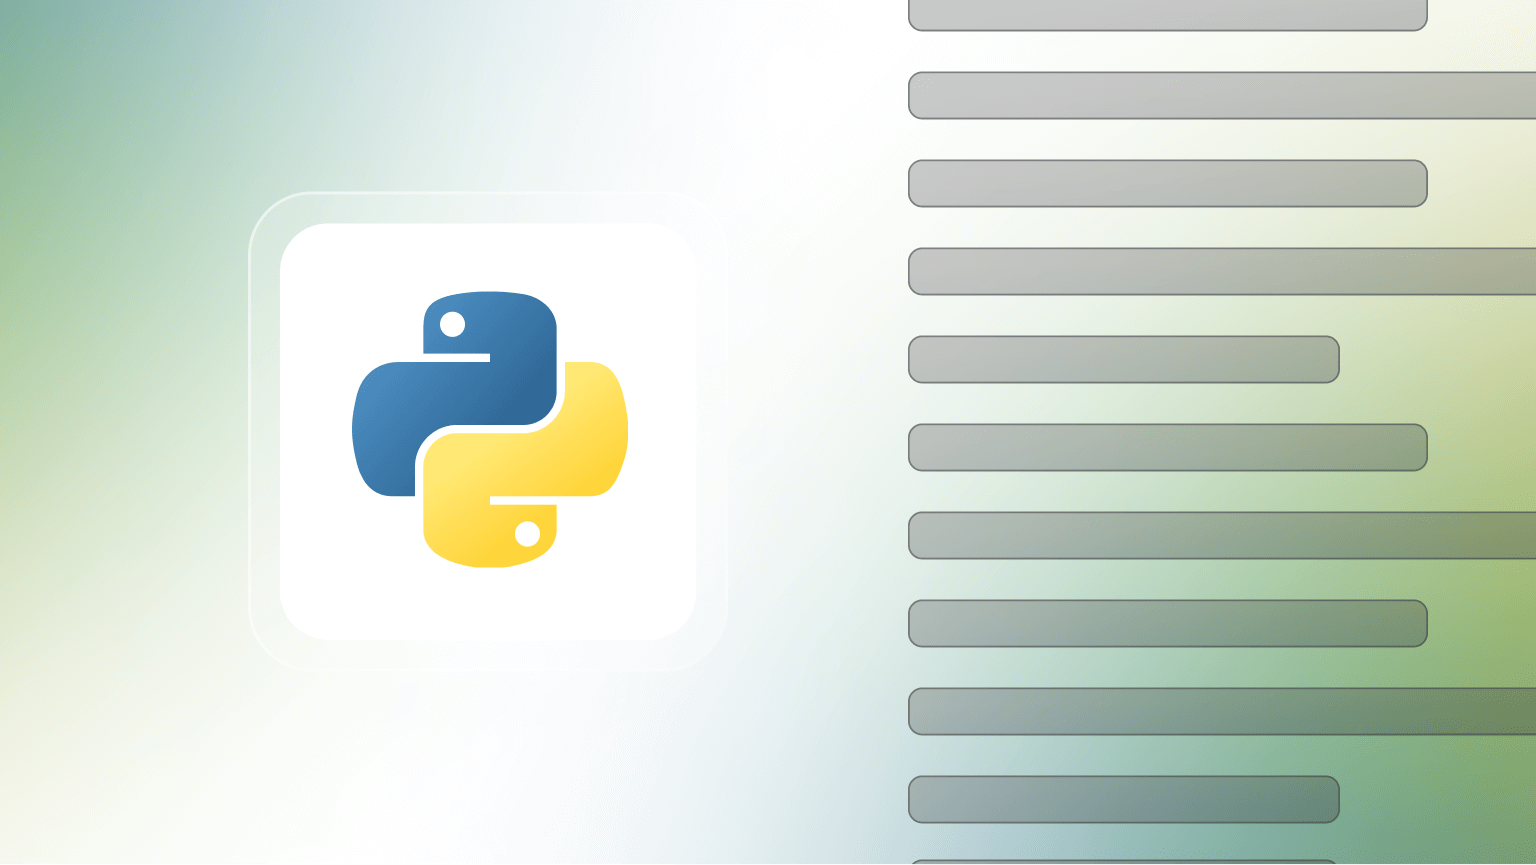 Python web scraping - Python logo with text on the side representing a web page and scraped data